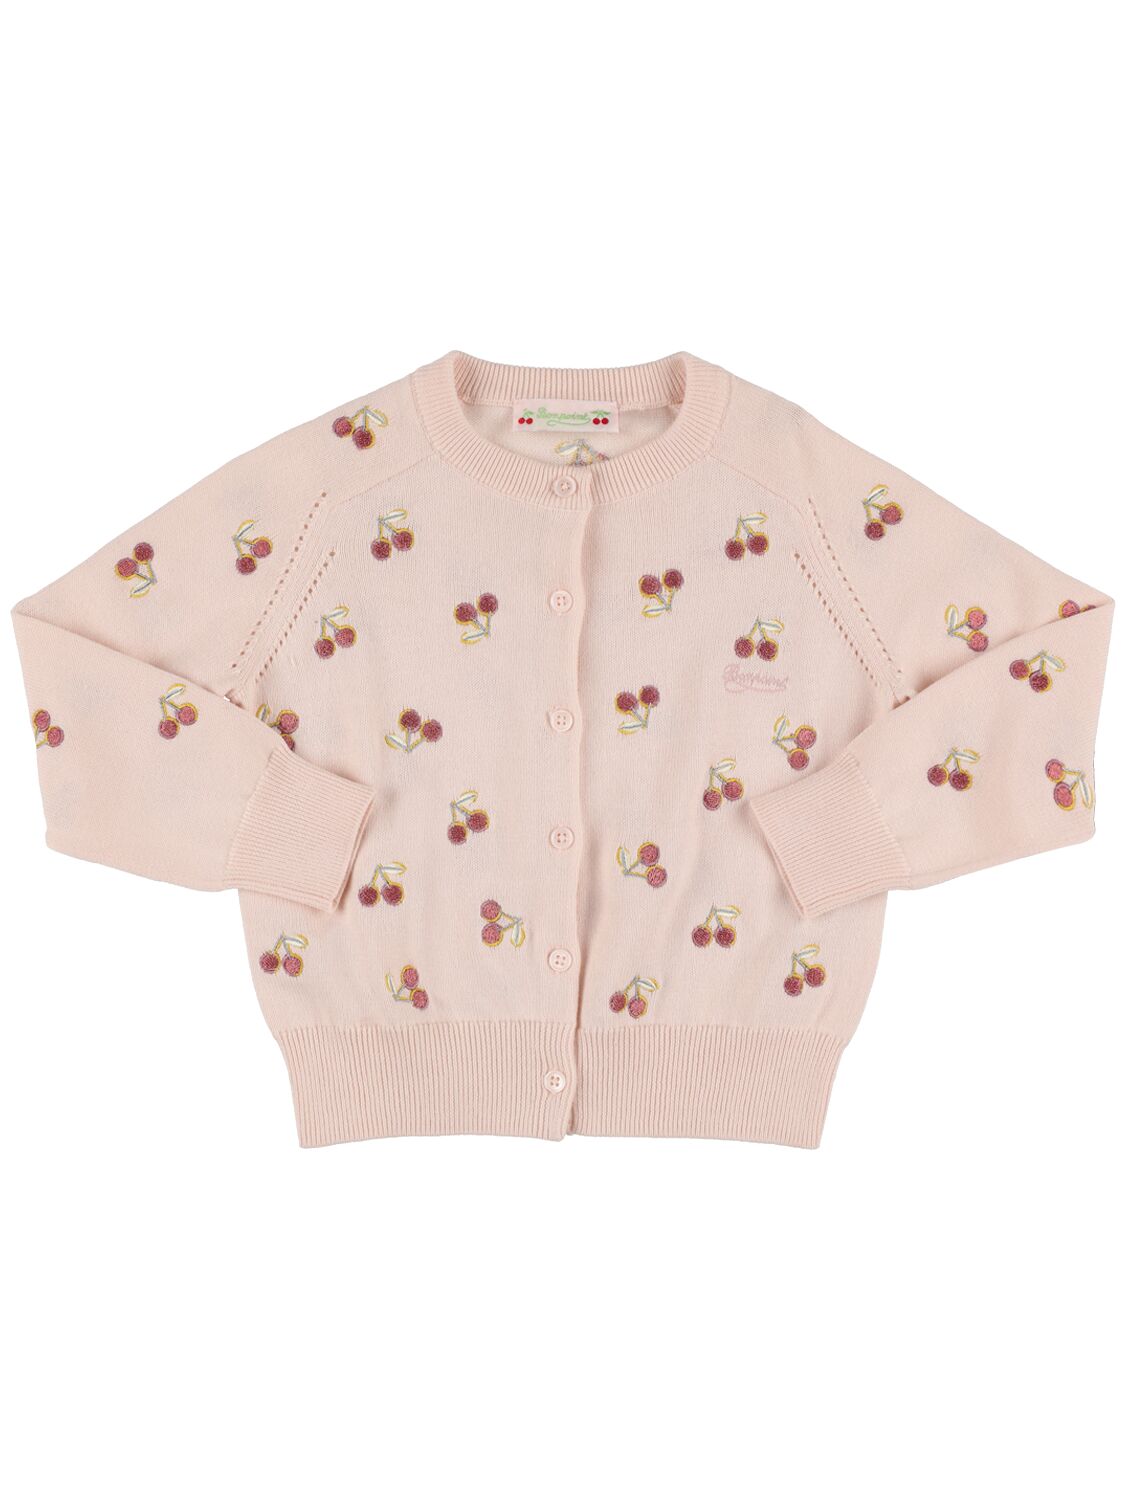 BONPOINT CHERRY EMBROIDERED COTTON KNIT CARDIGAN